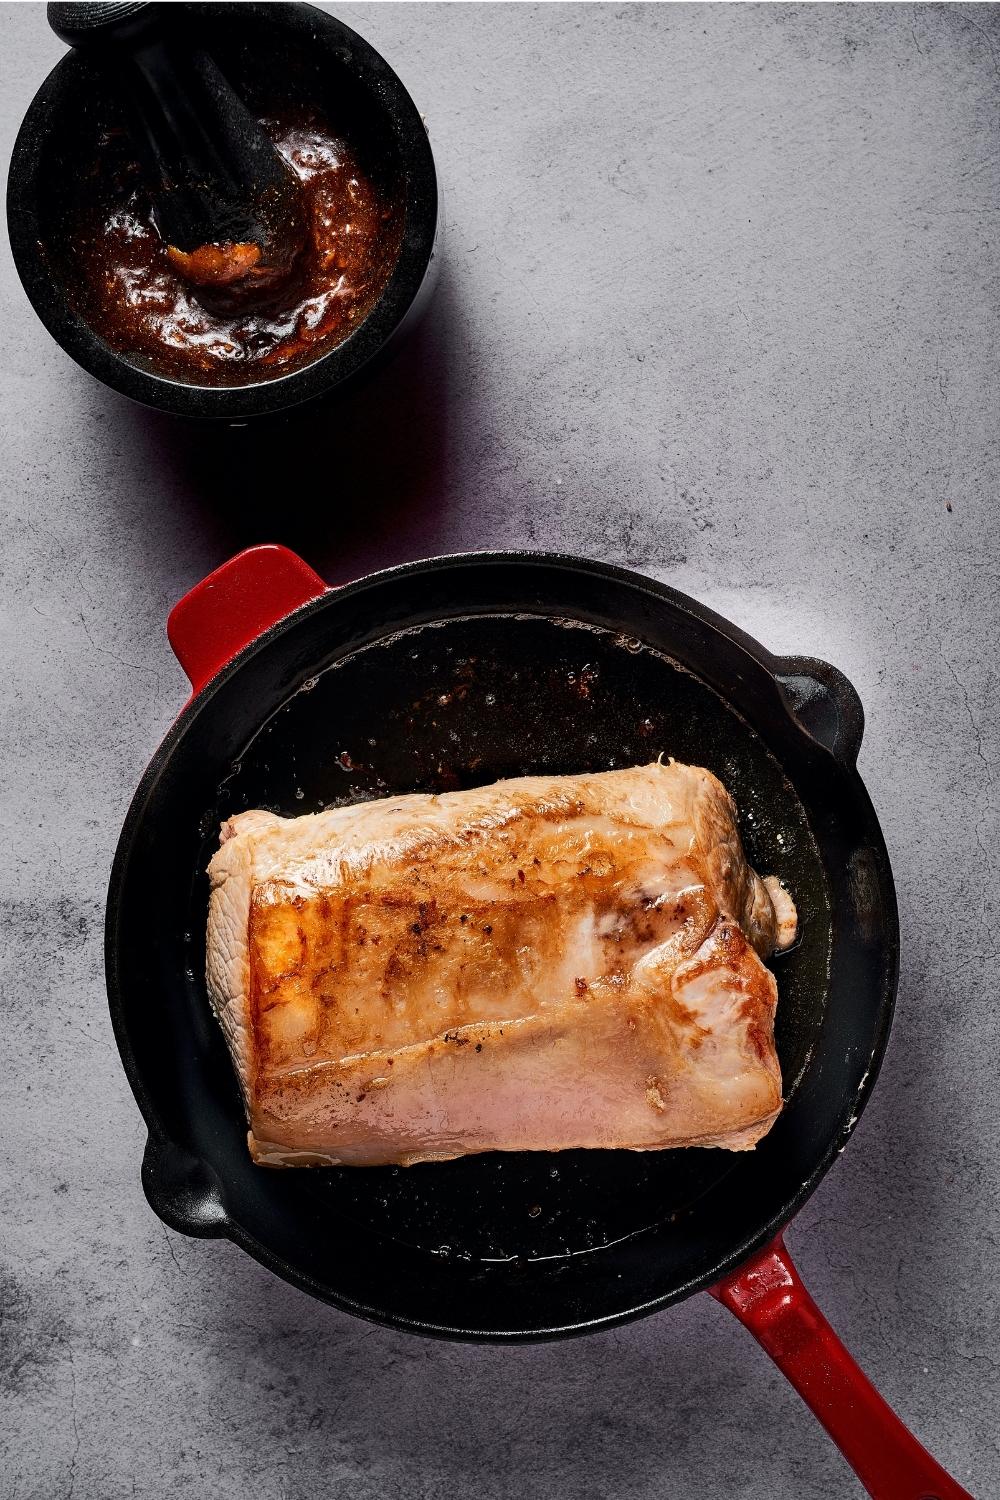 A seared pork loin in a pan with a red handle. The pan is on a white table.